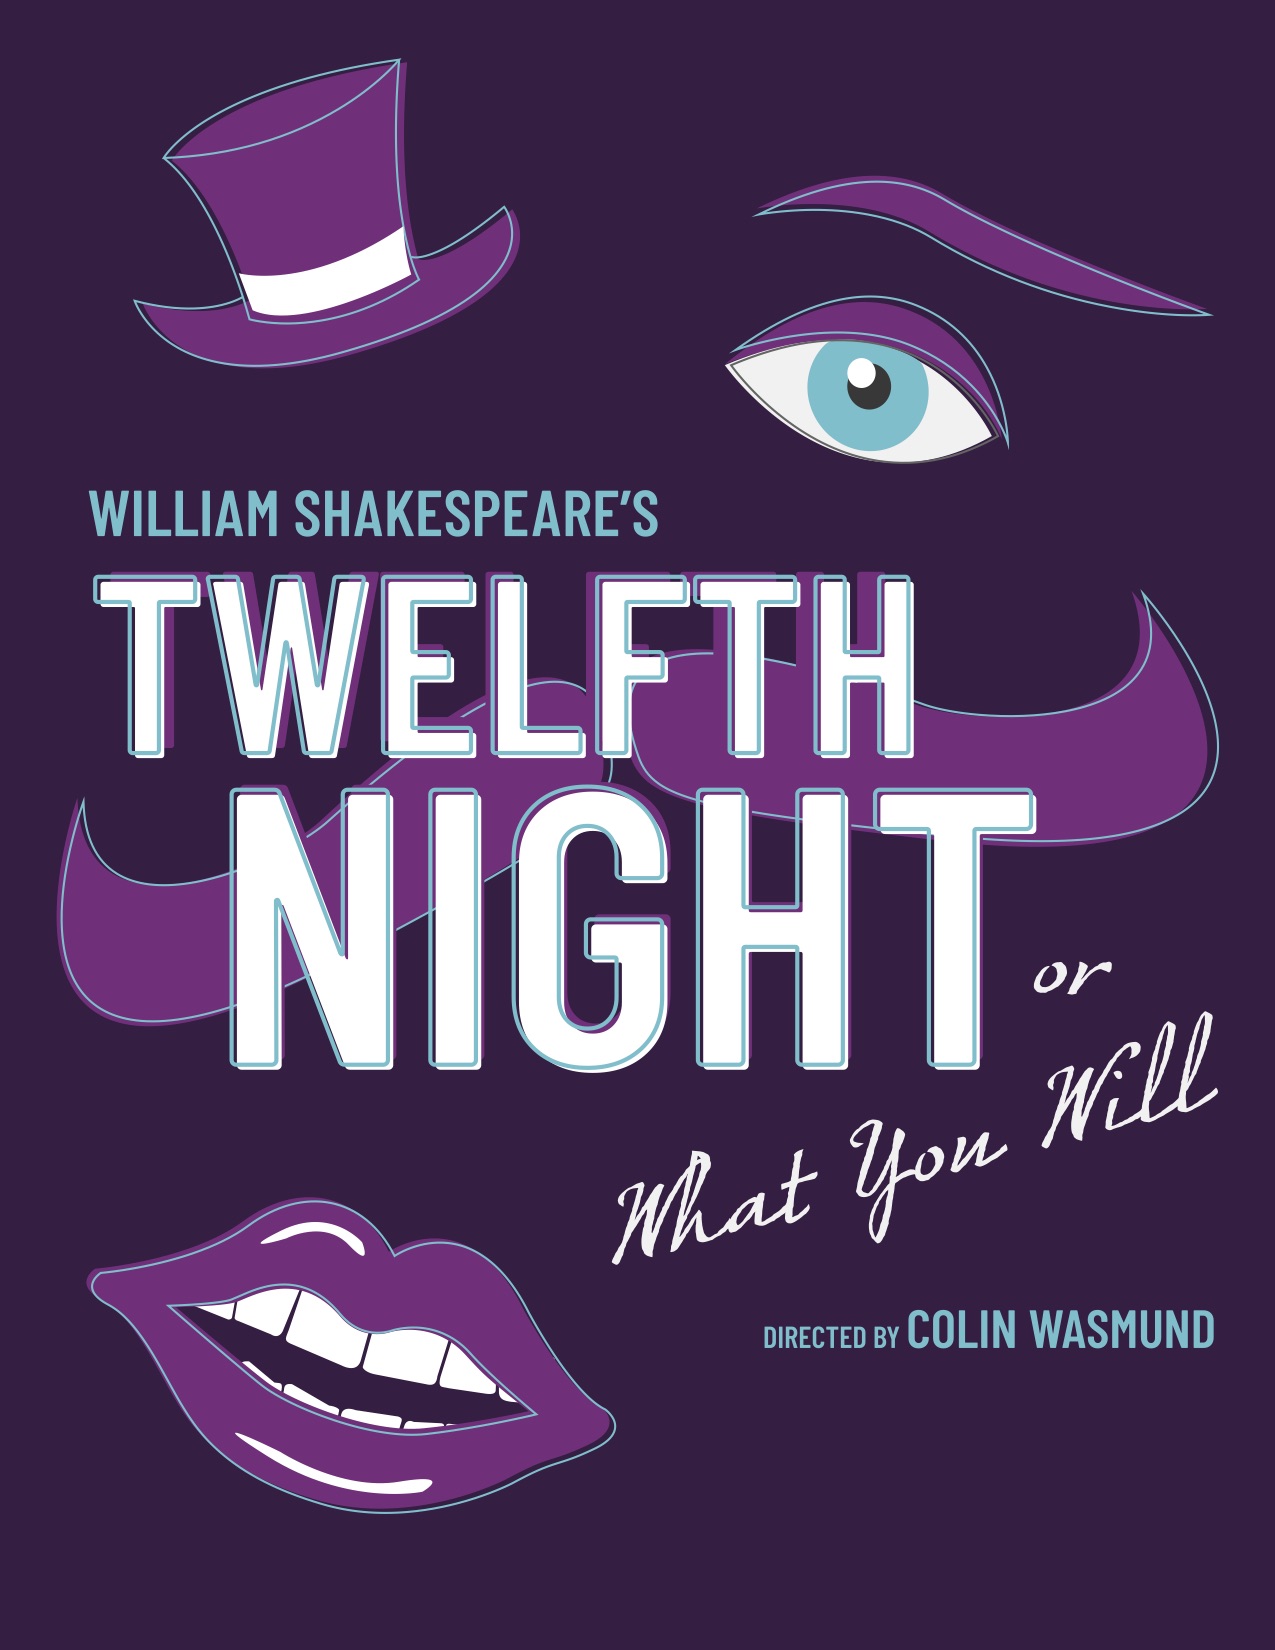 Twelfth Night from the WCU School of Stage & Screen